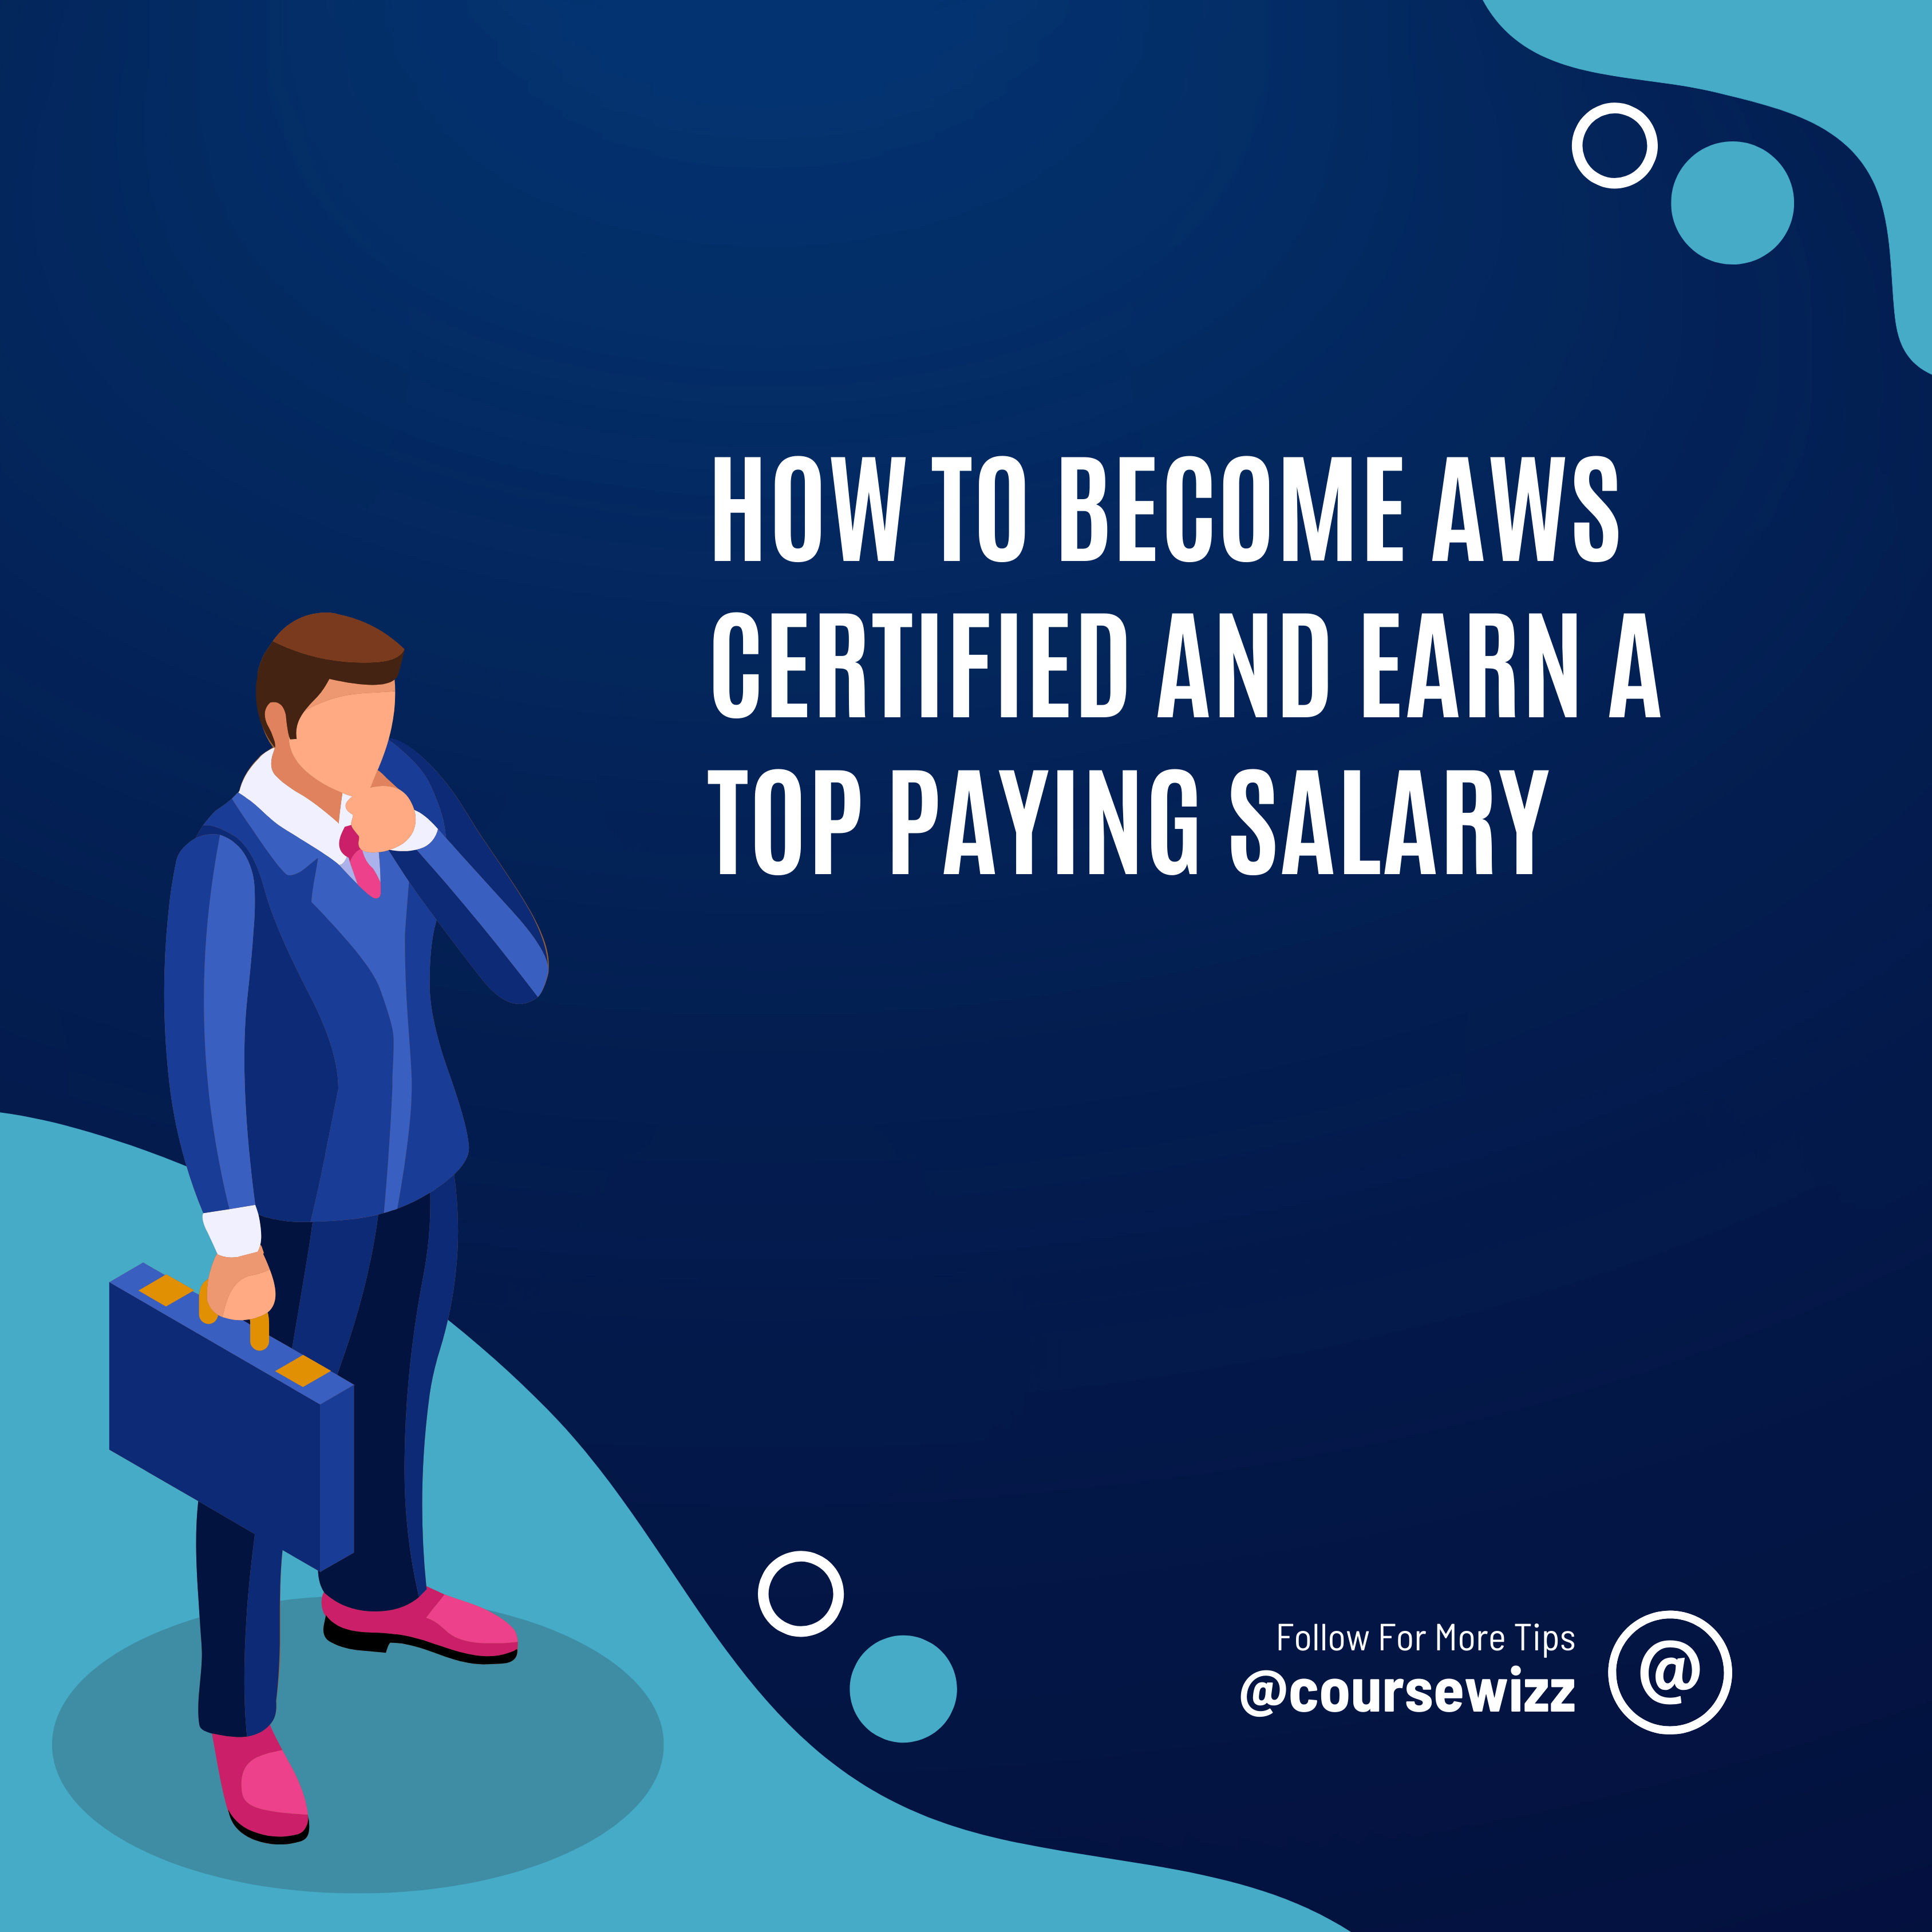 How to Become AWS Certified and Earn a Top Paying Salary